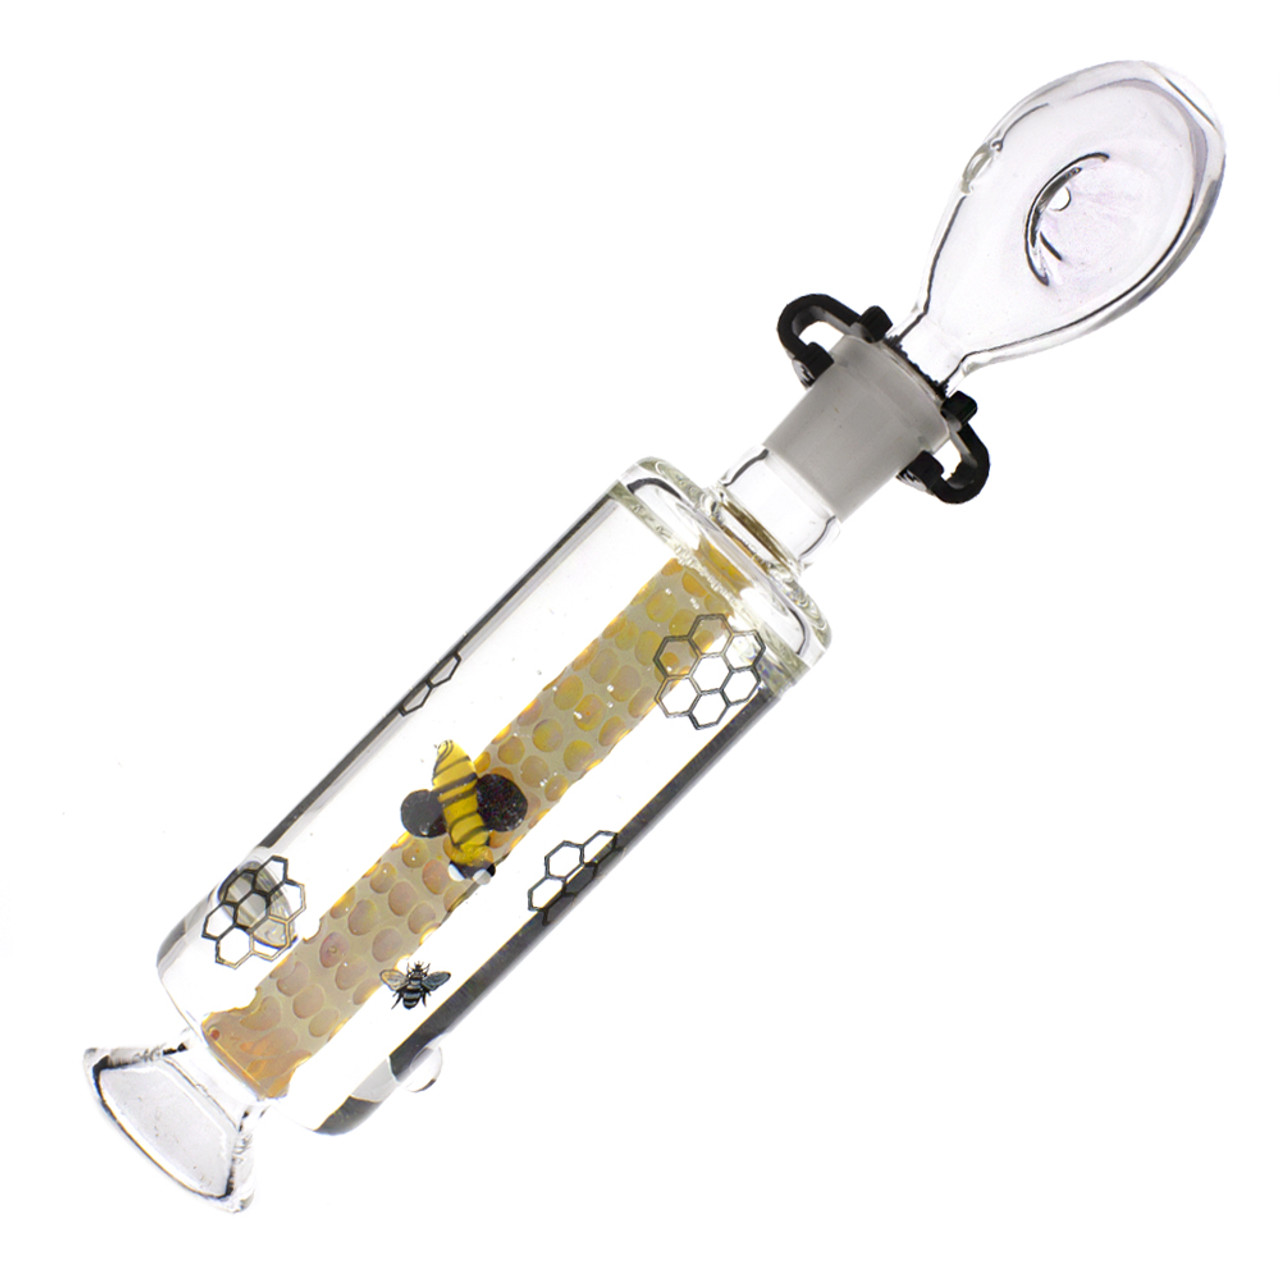 Stratus 2-in-1 Freezer Pipe & Nectar Collector